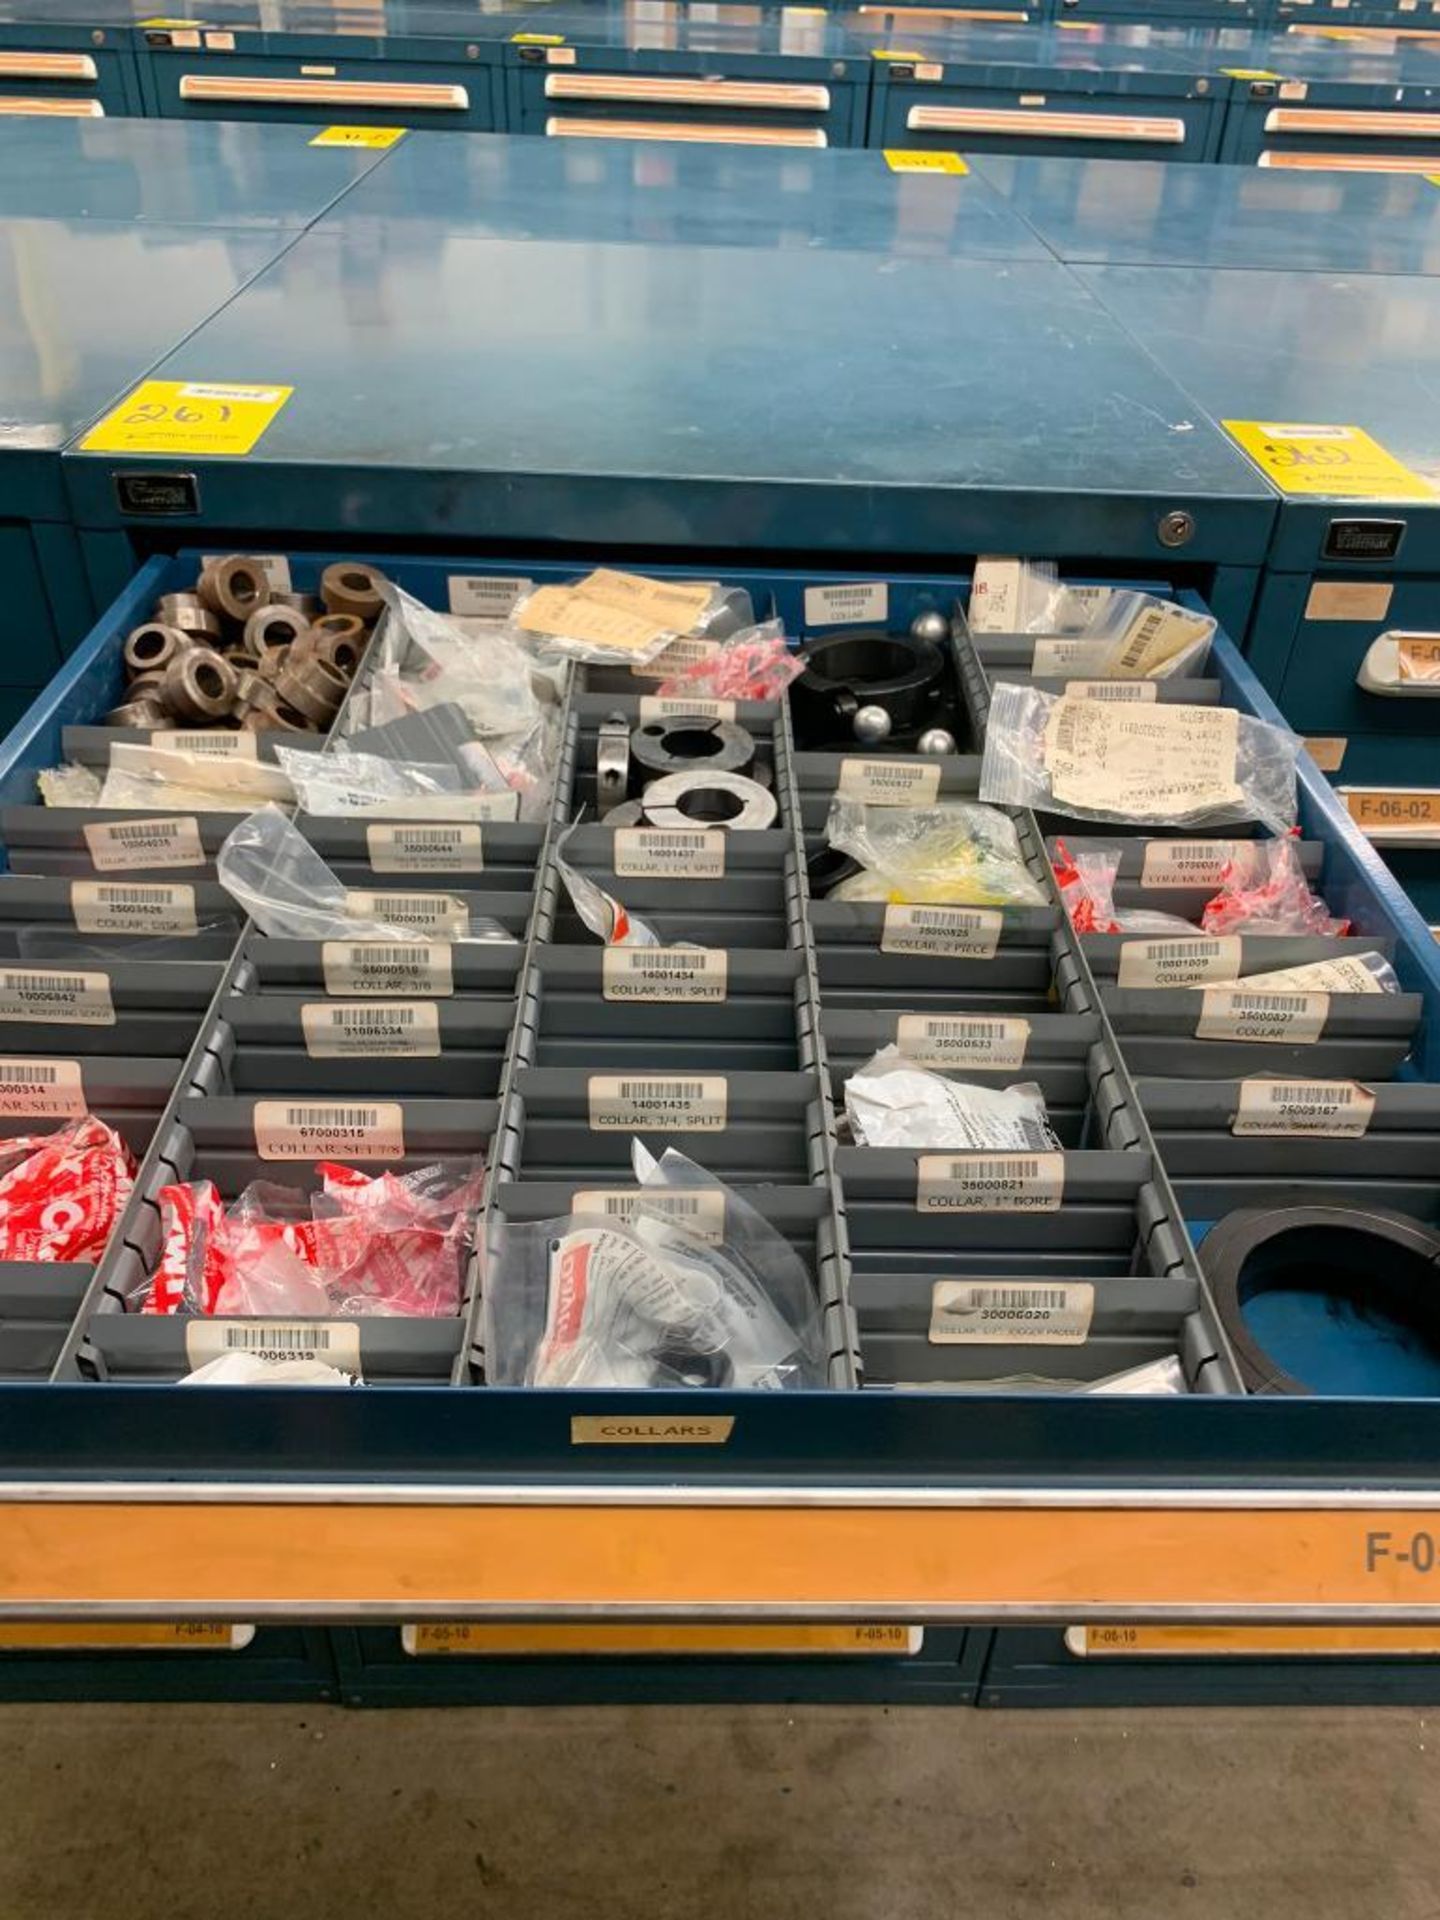 Vidmar 10-Drawer Cabinet w/ Collars, Oil Seals, Seal Kits, Gaskets, Assorted Cams - Image 2 of 13